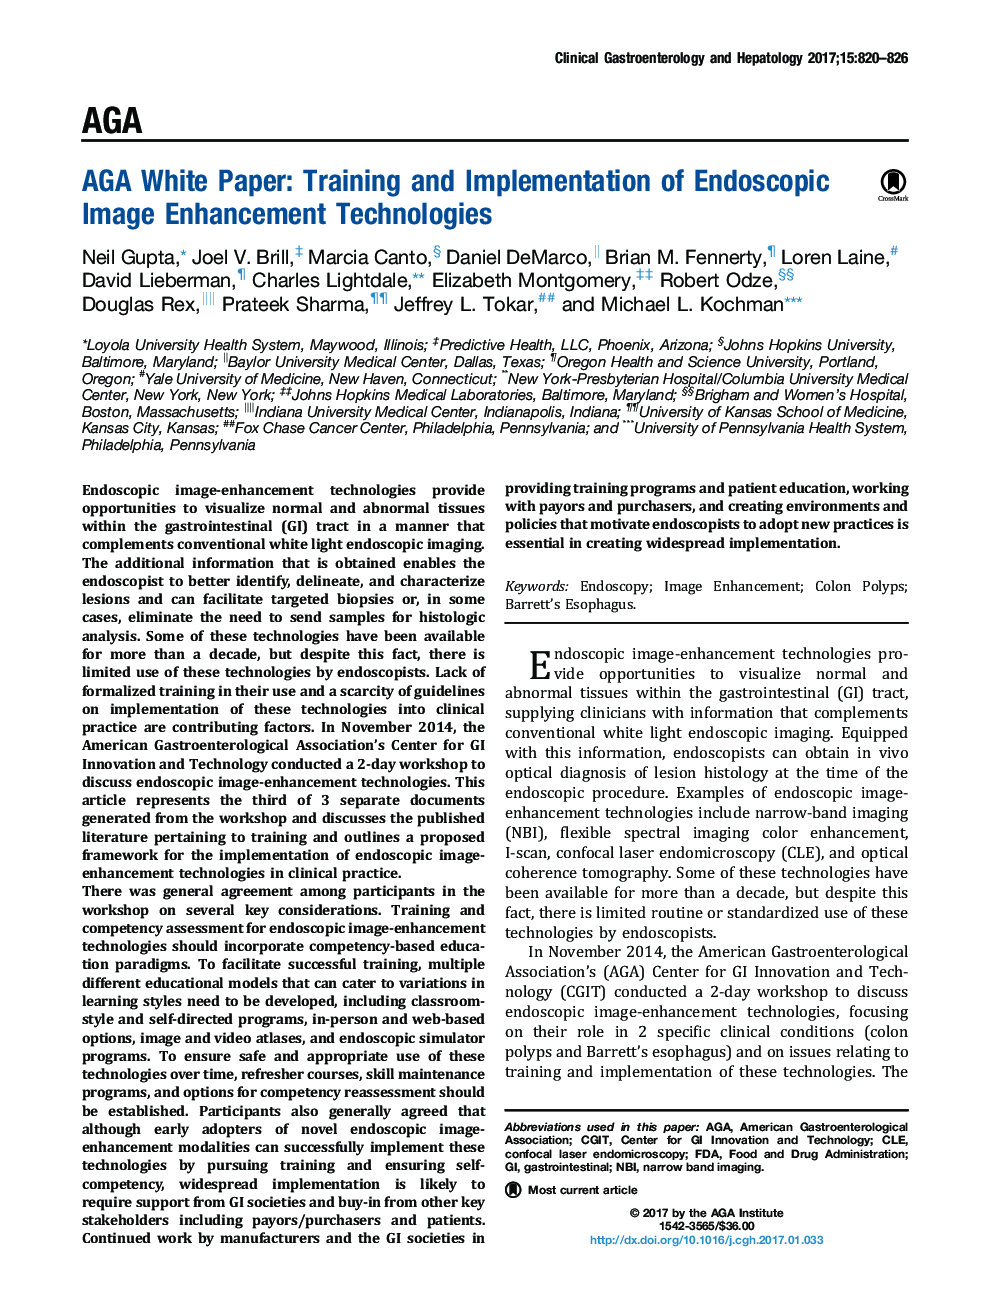 AGA White Paper: Training and Implementation of Endoscopic Image Enhancement Technologies